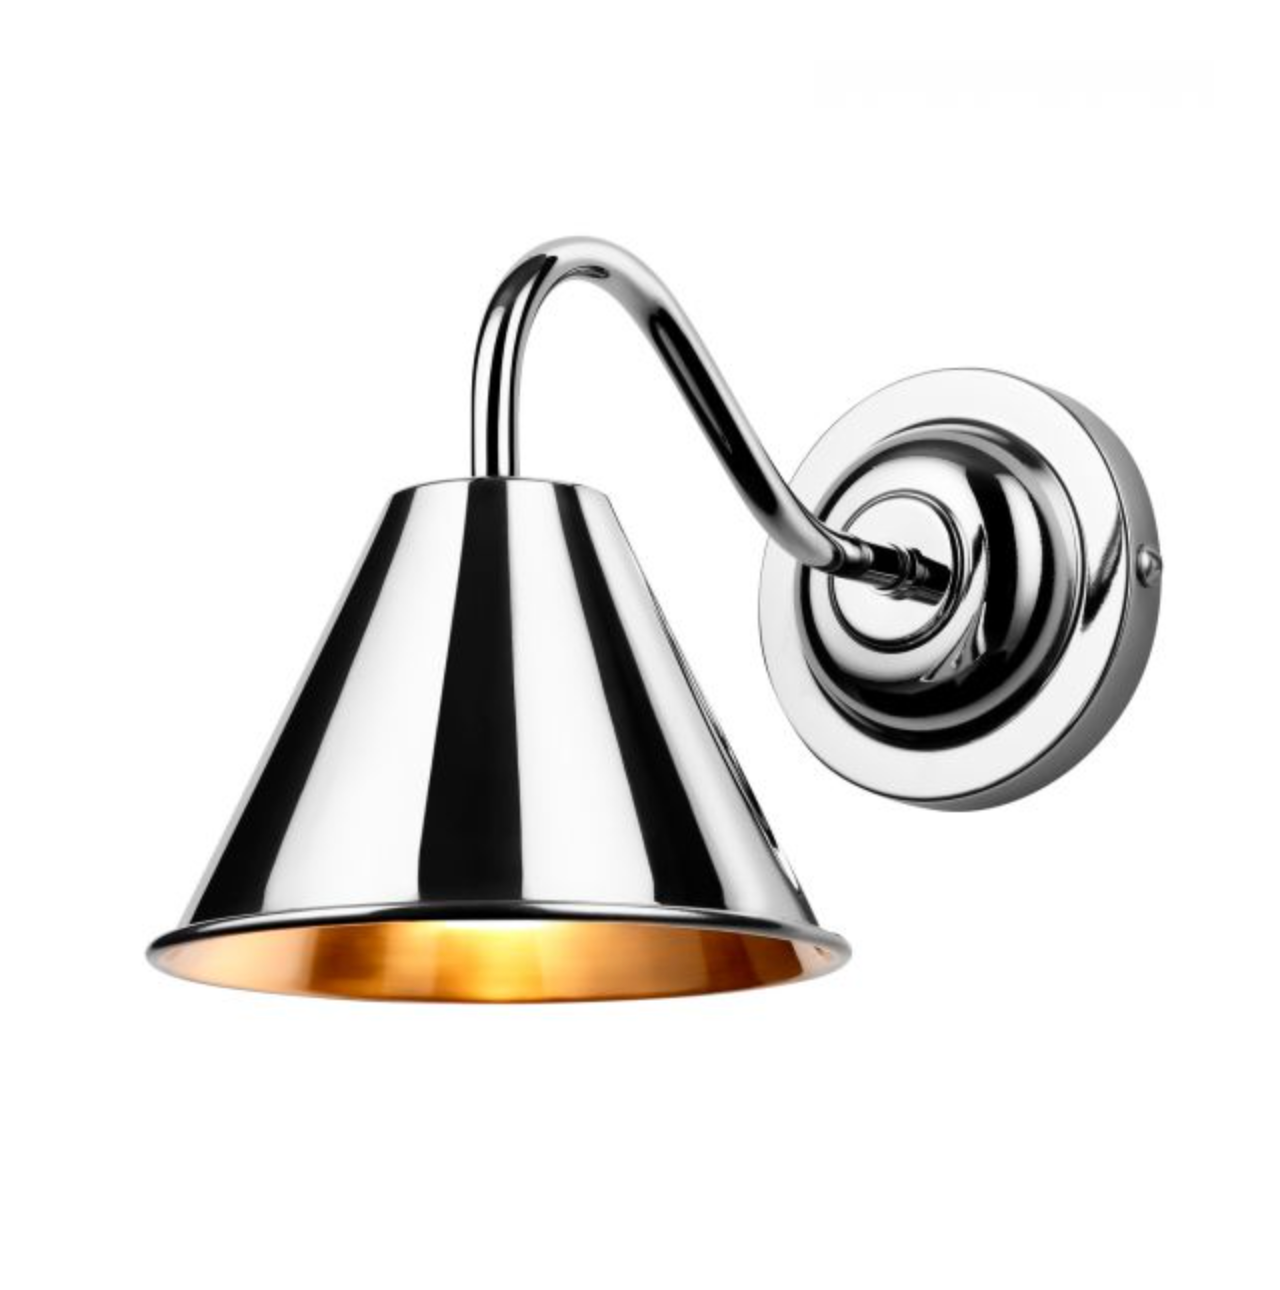 AVO Solid Brass Bathroom Wall Light In Polished Chrome Finish - ID 11191